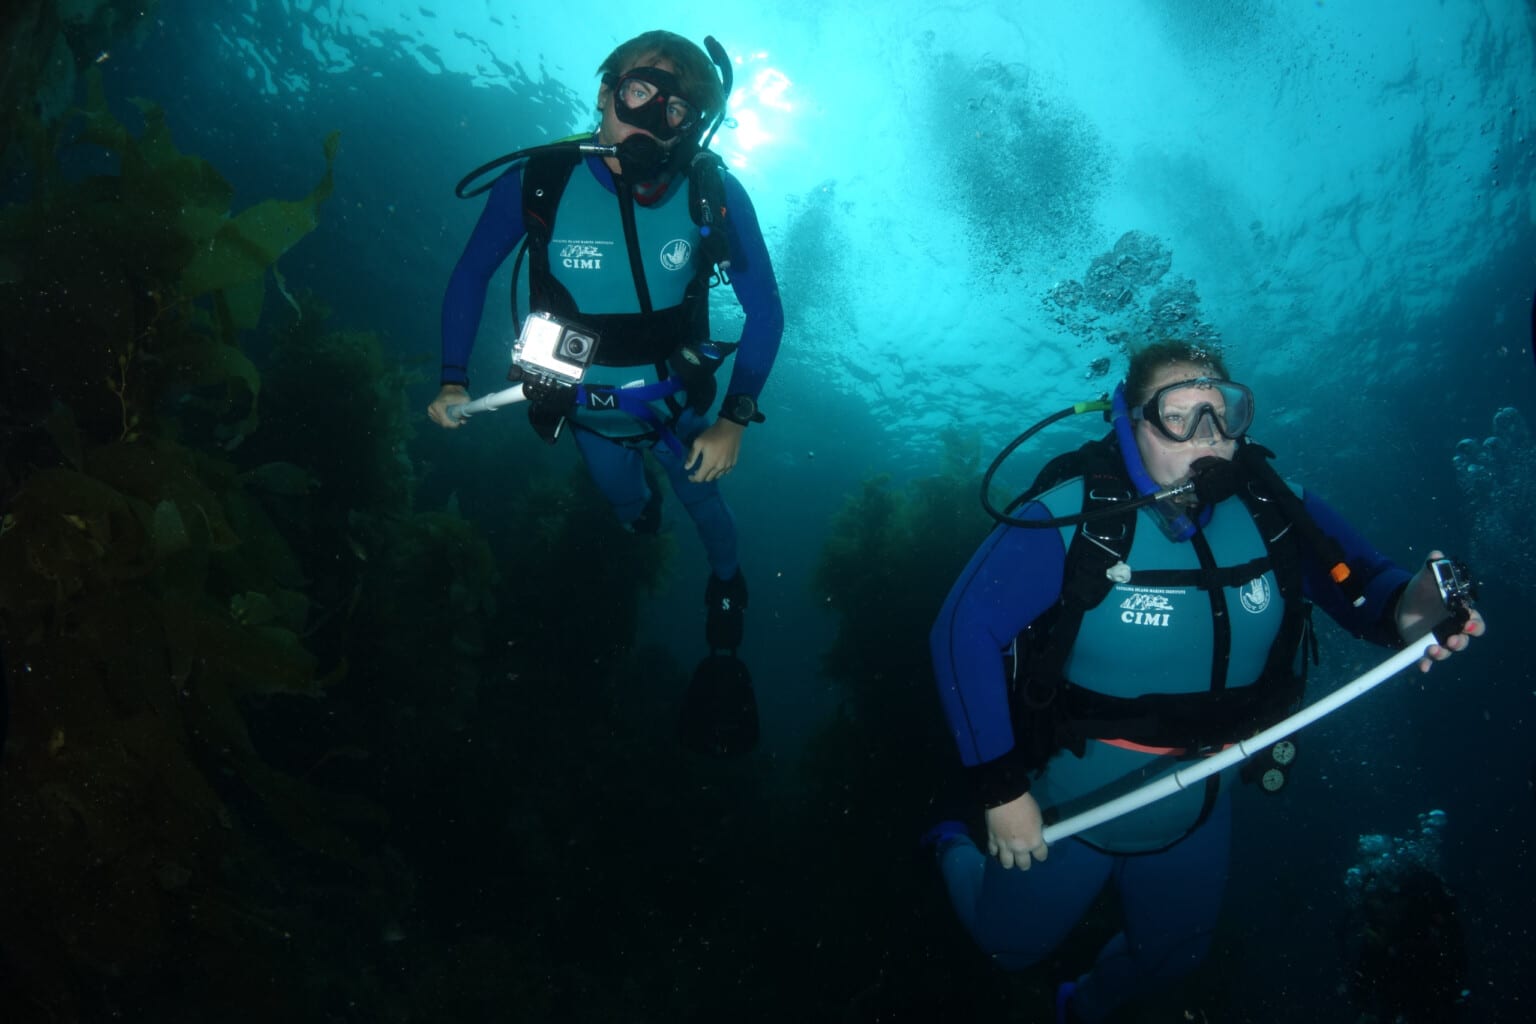 Two scuba divers using GoPros.